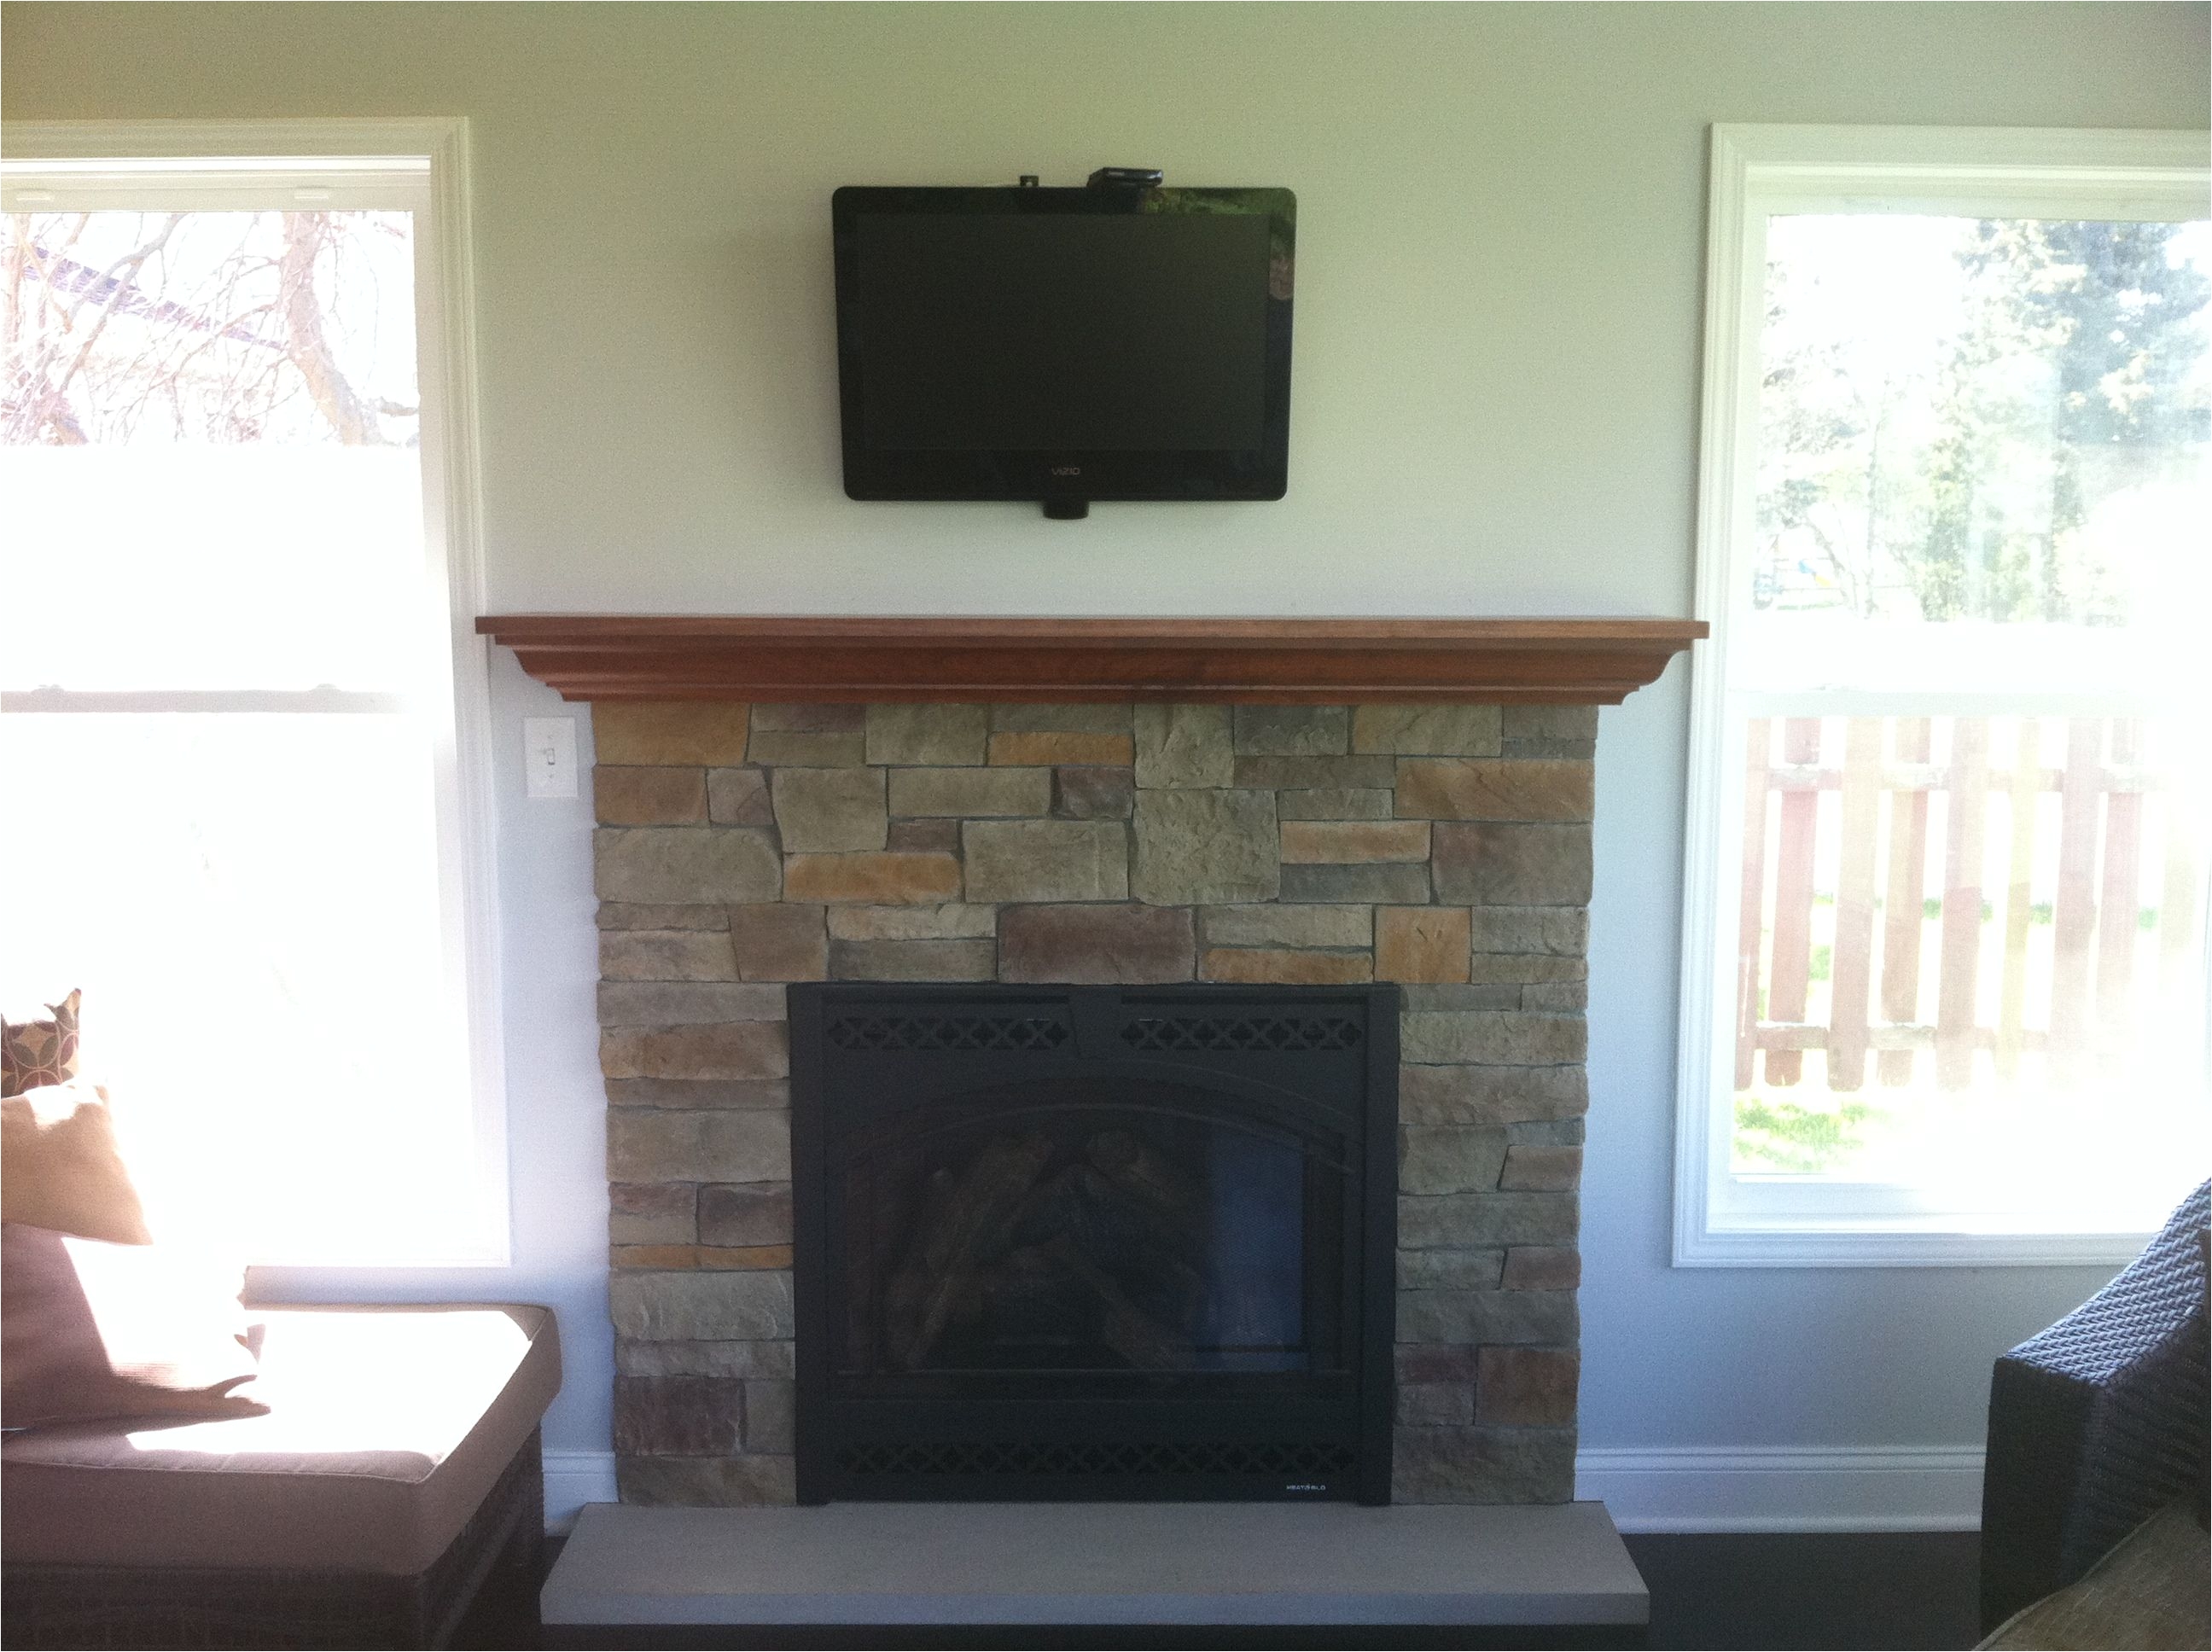 Aarons Fireplace Fresh How to Build A Gas Fireplace Mantel Gas Fireplace Insert